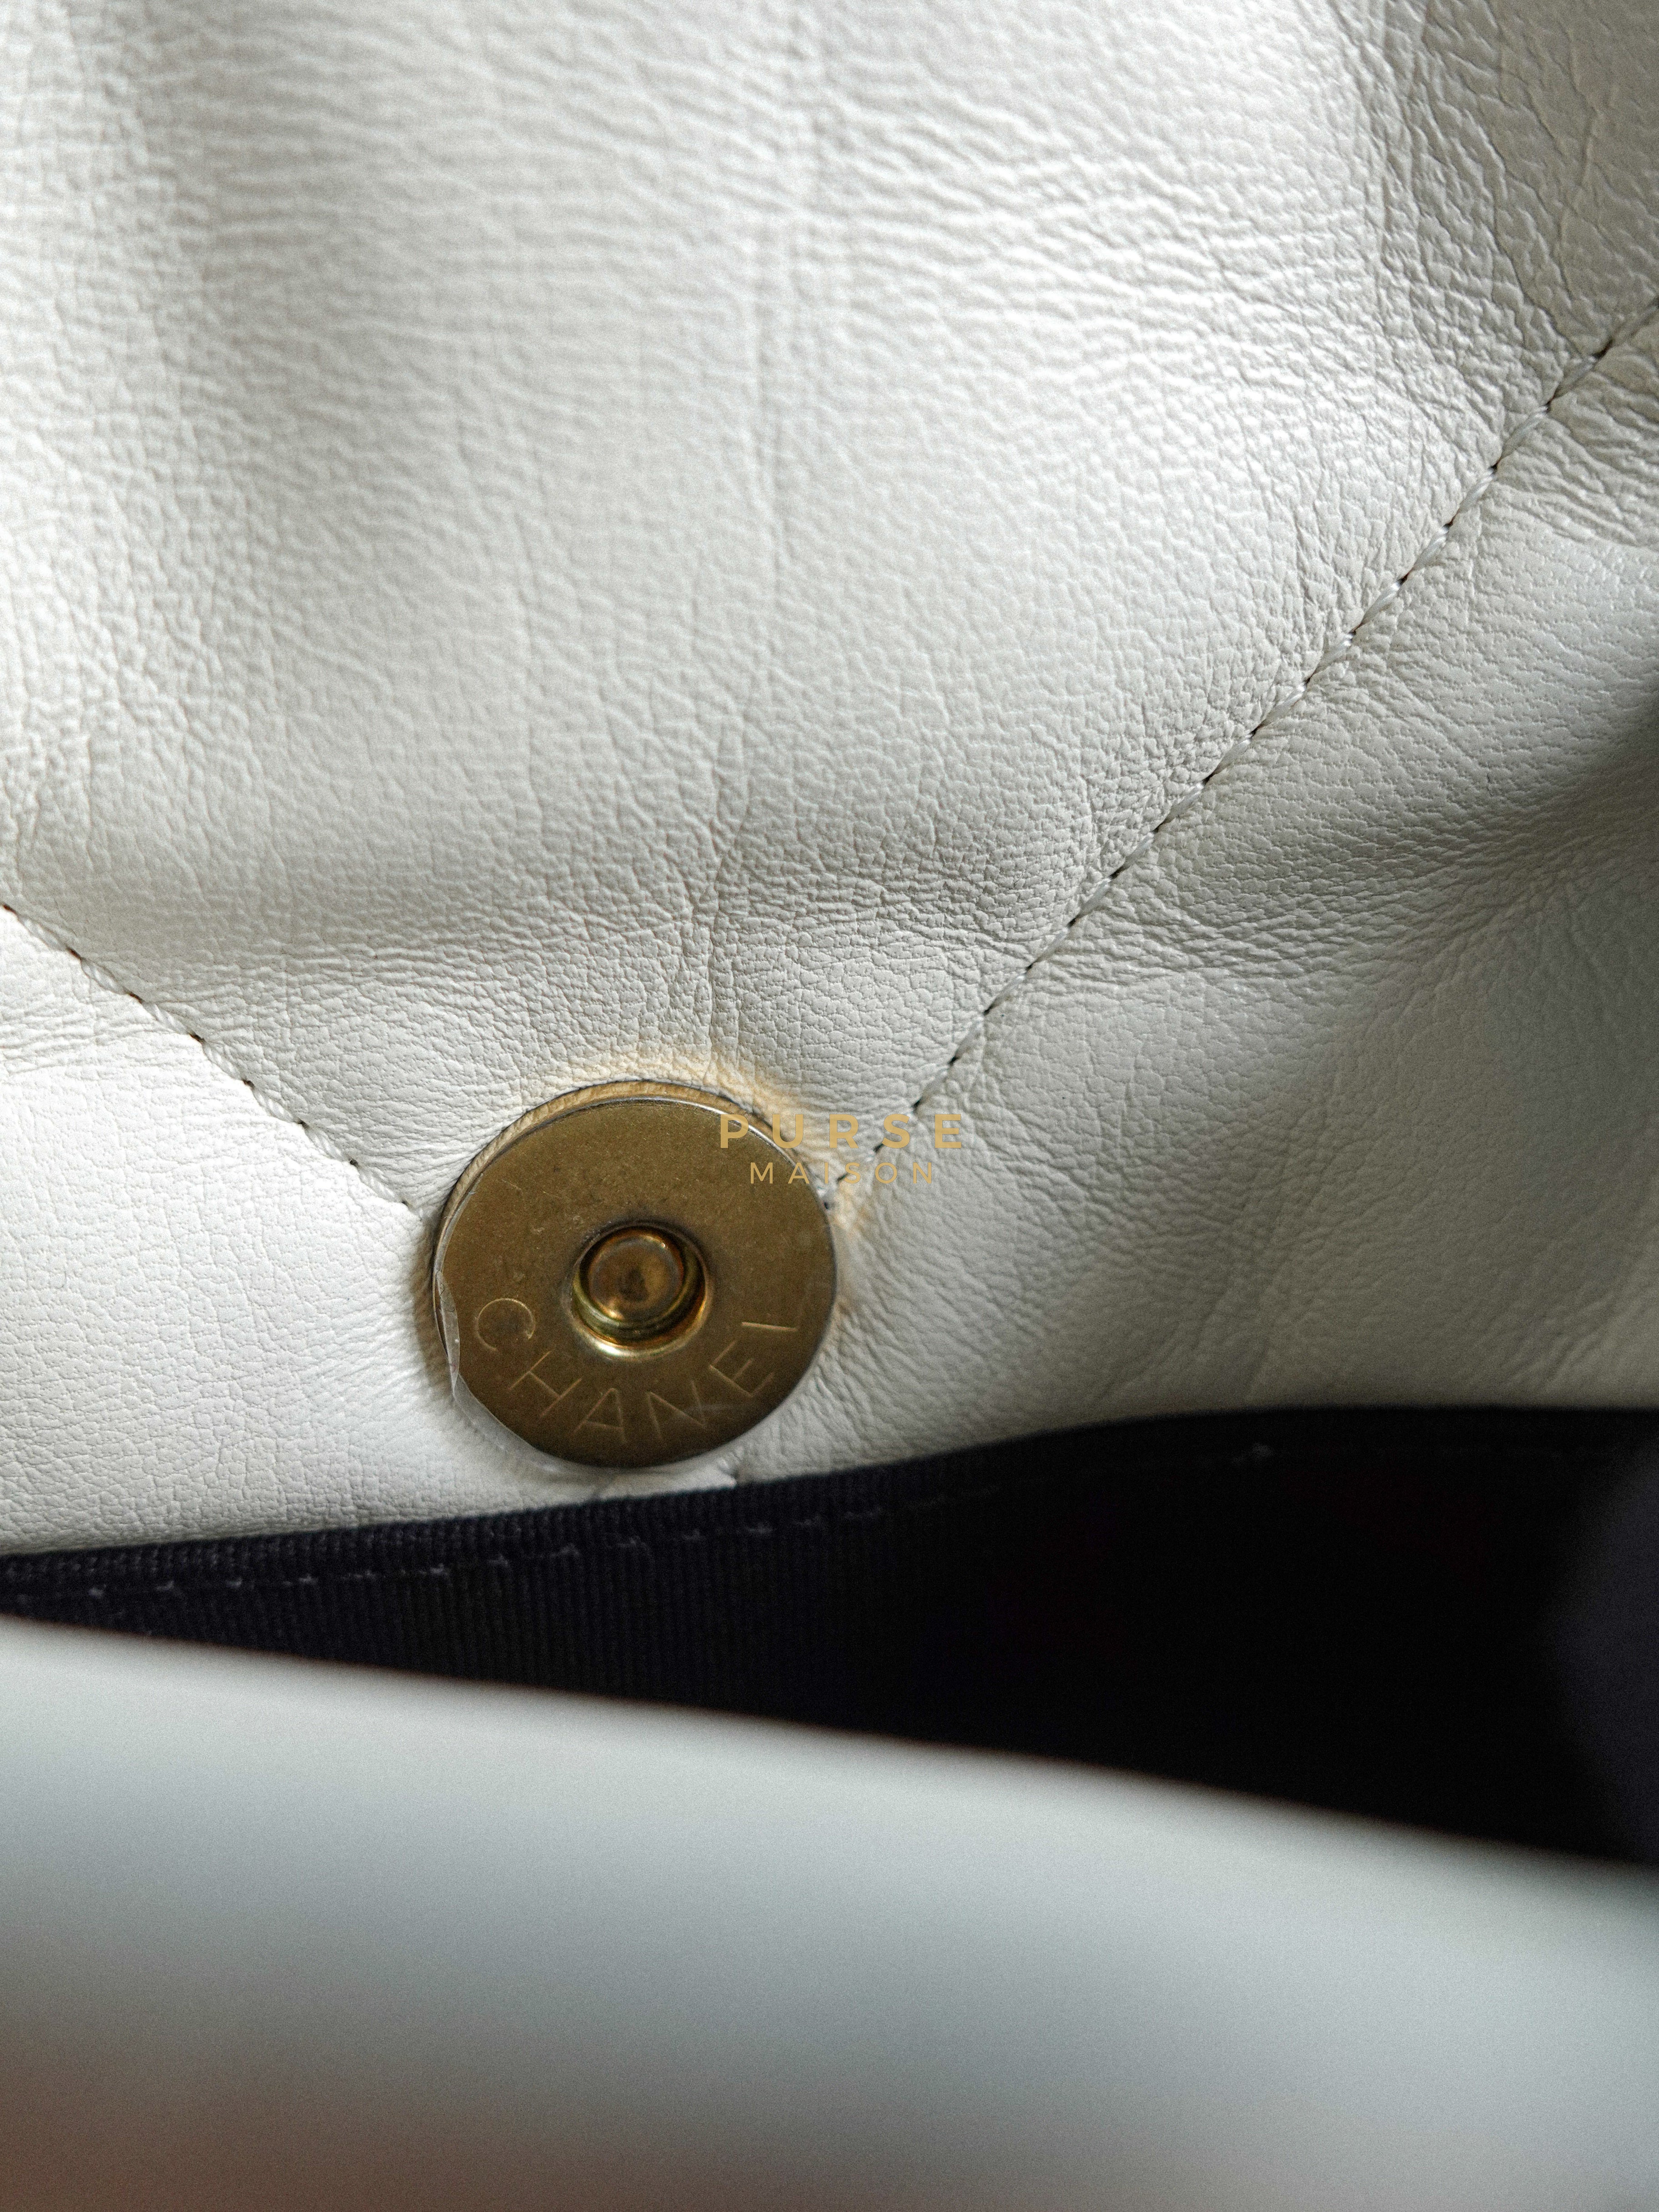 19 Small Flap Bag in White Lambskin Leather and Mixed Hardware (Microchip) | Purse Maison Luxury Bags Shop